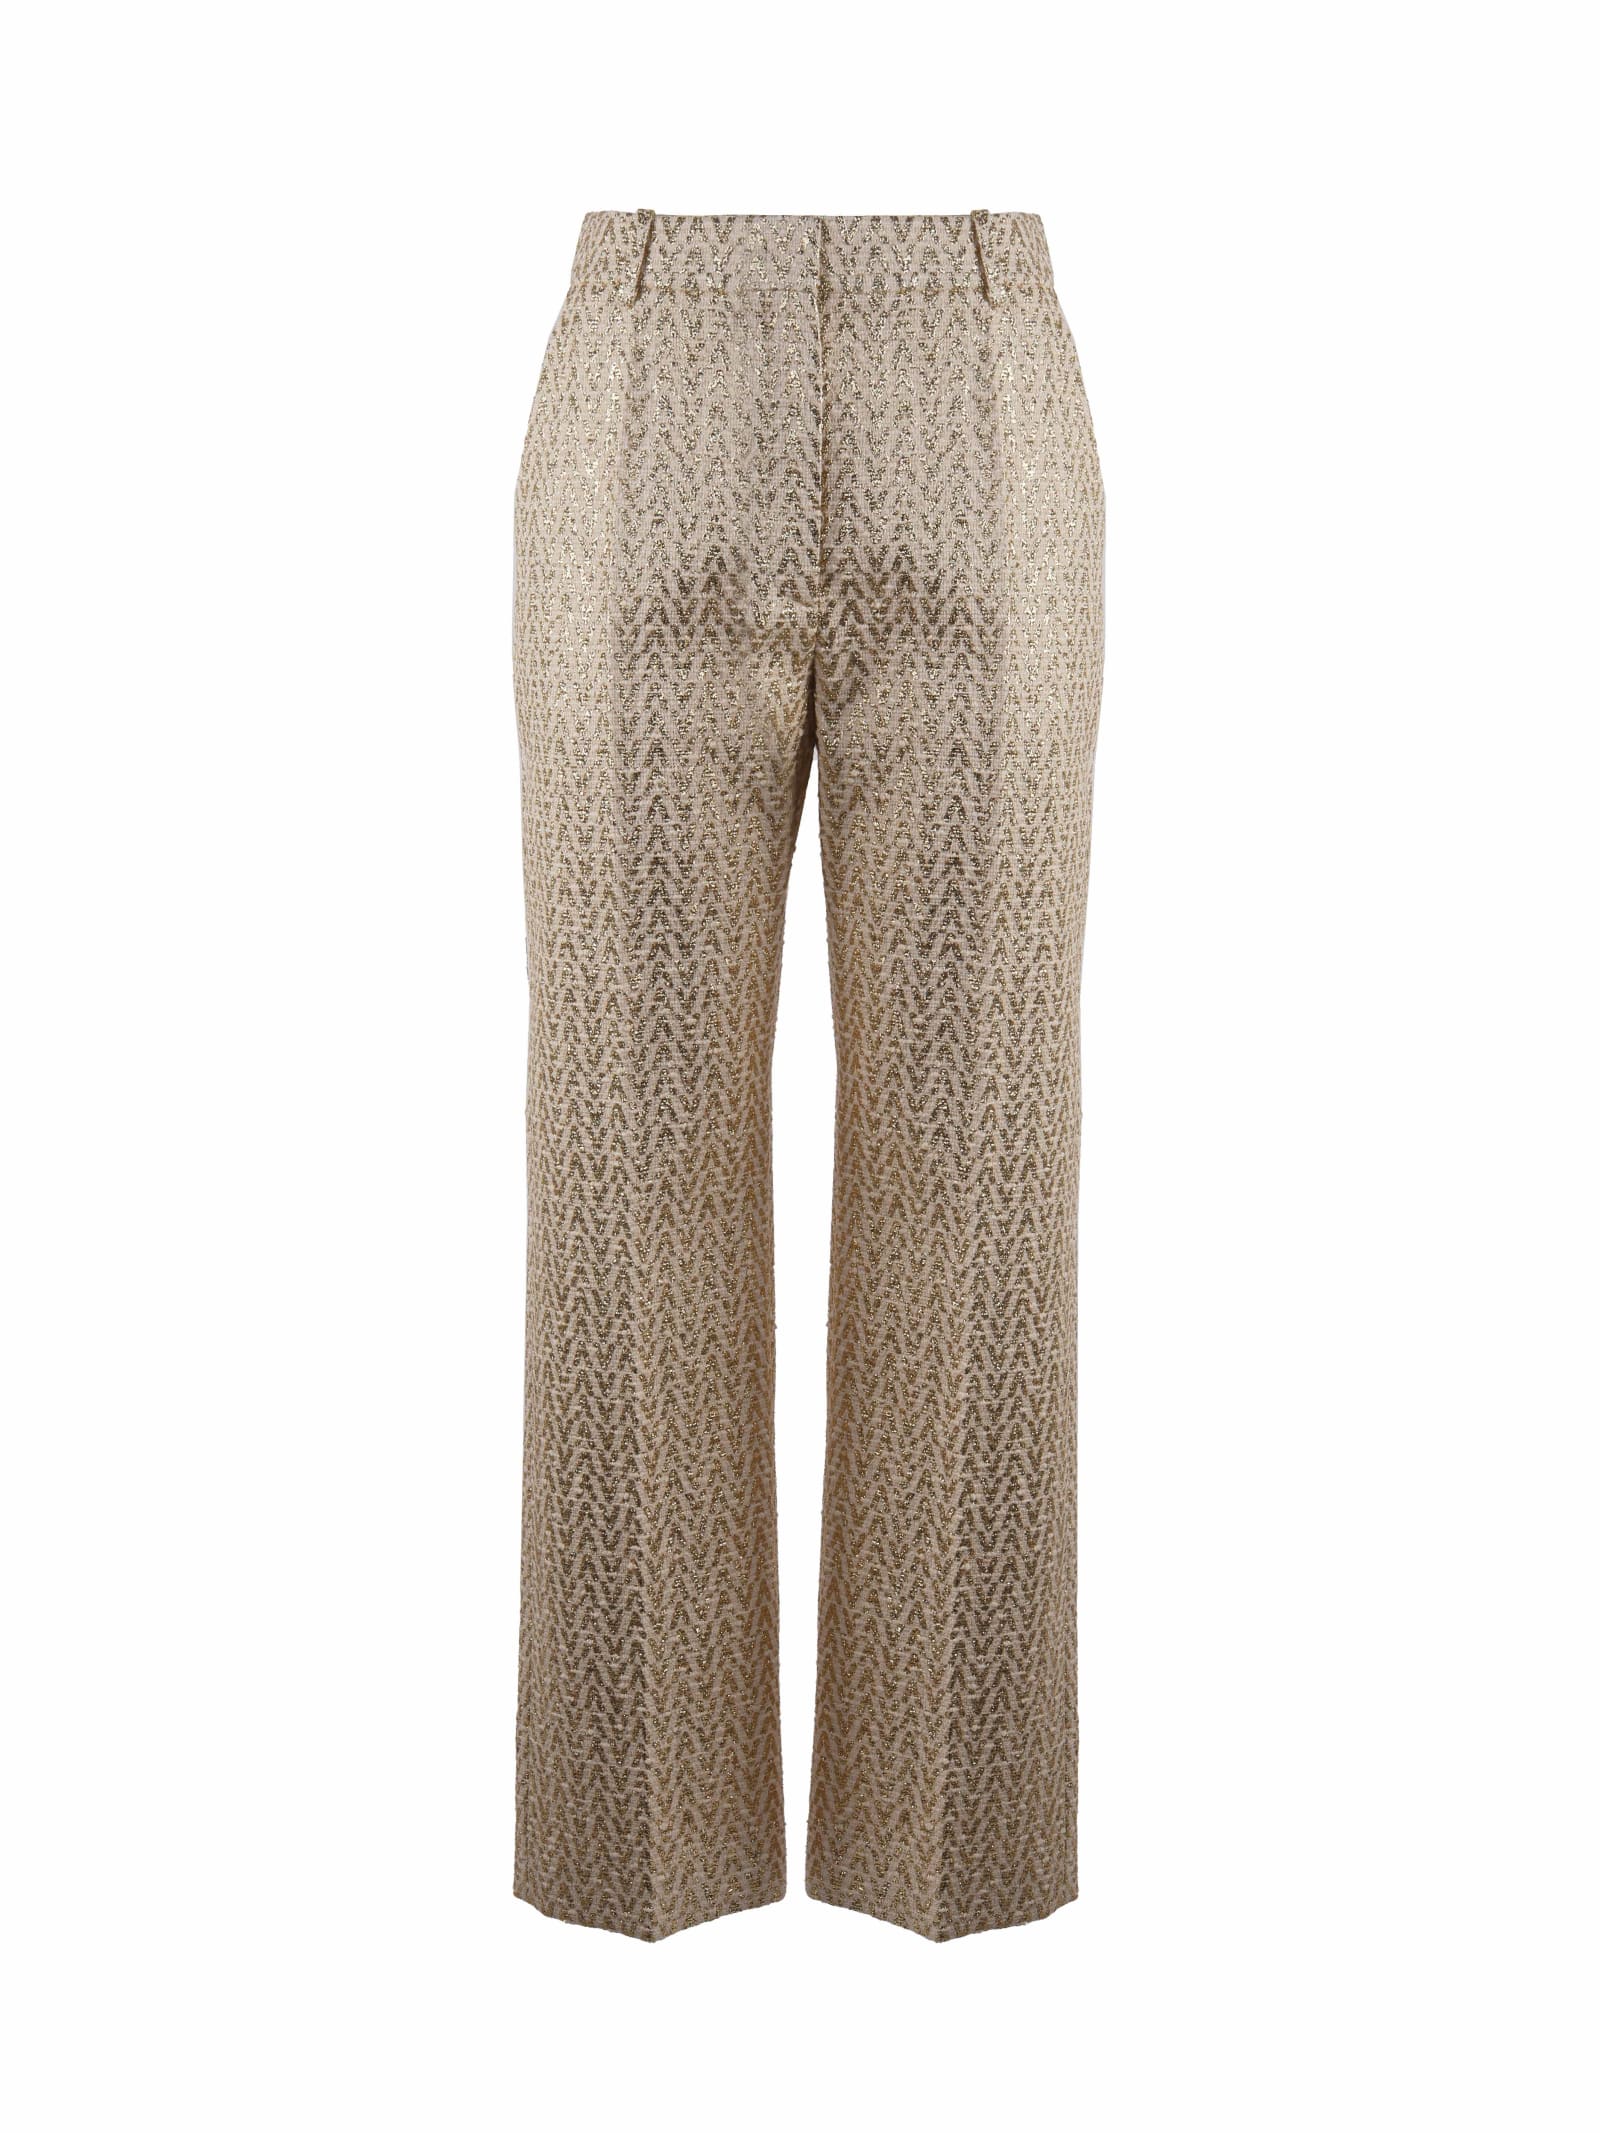 Valentino Optical Boucle Trousers